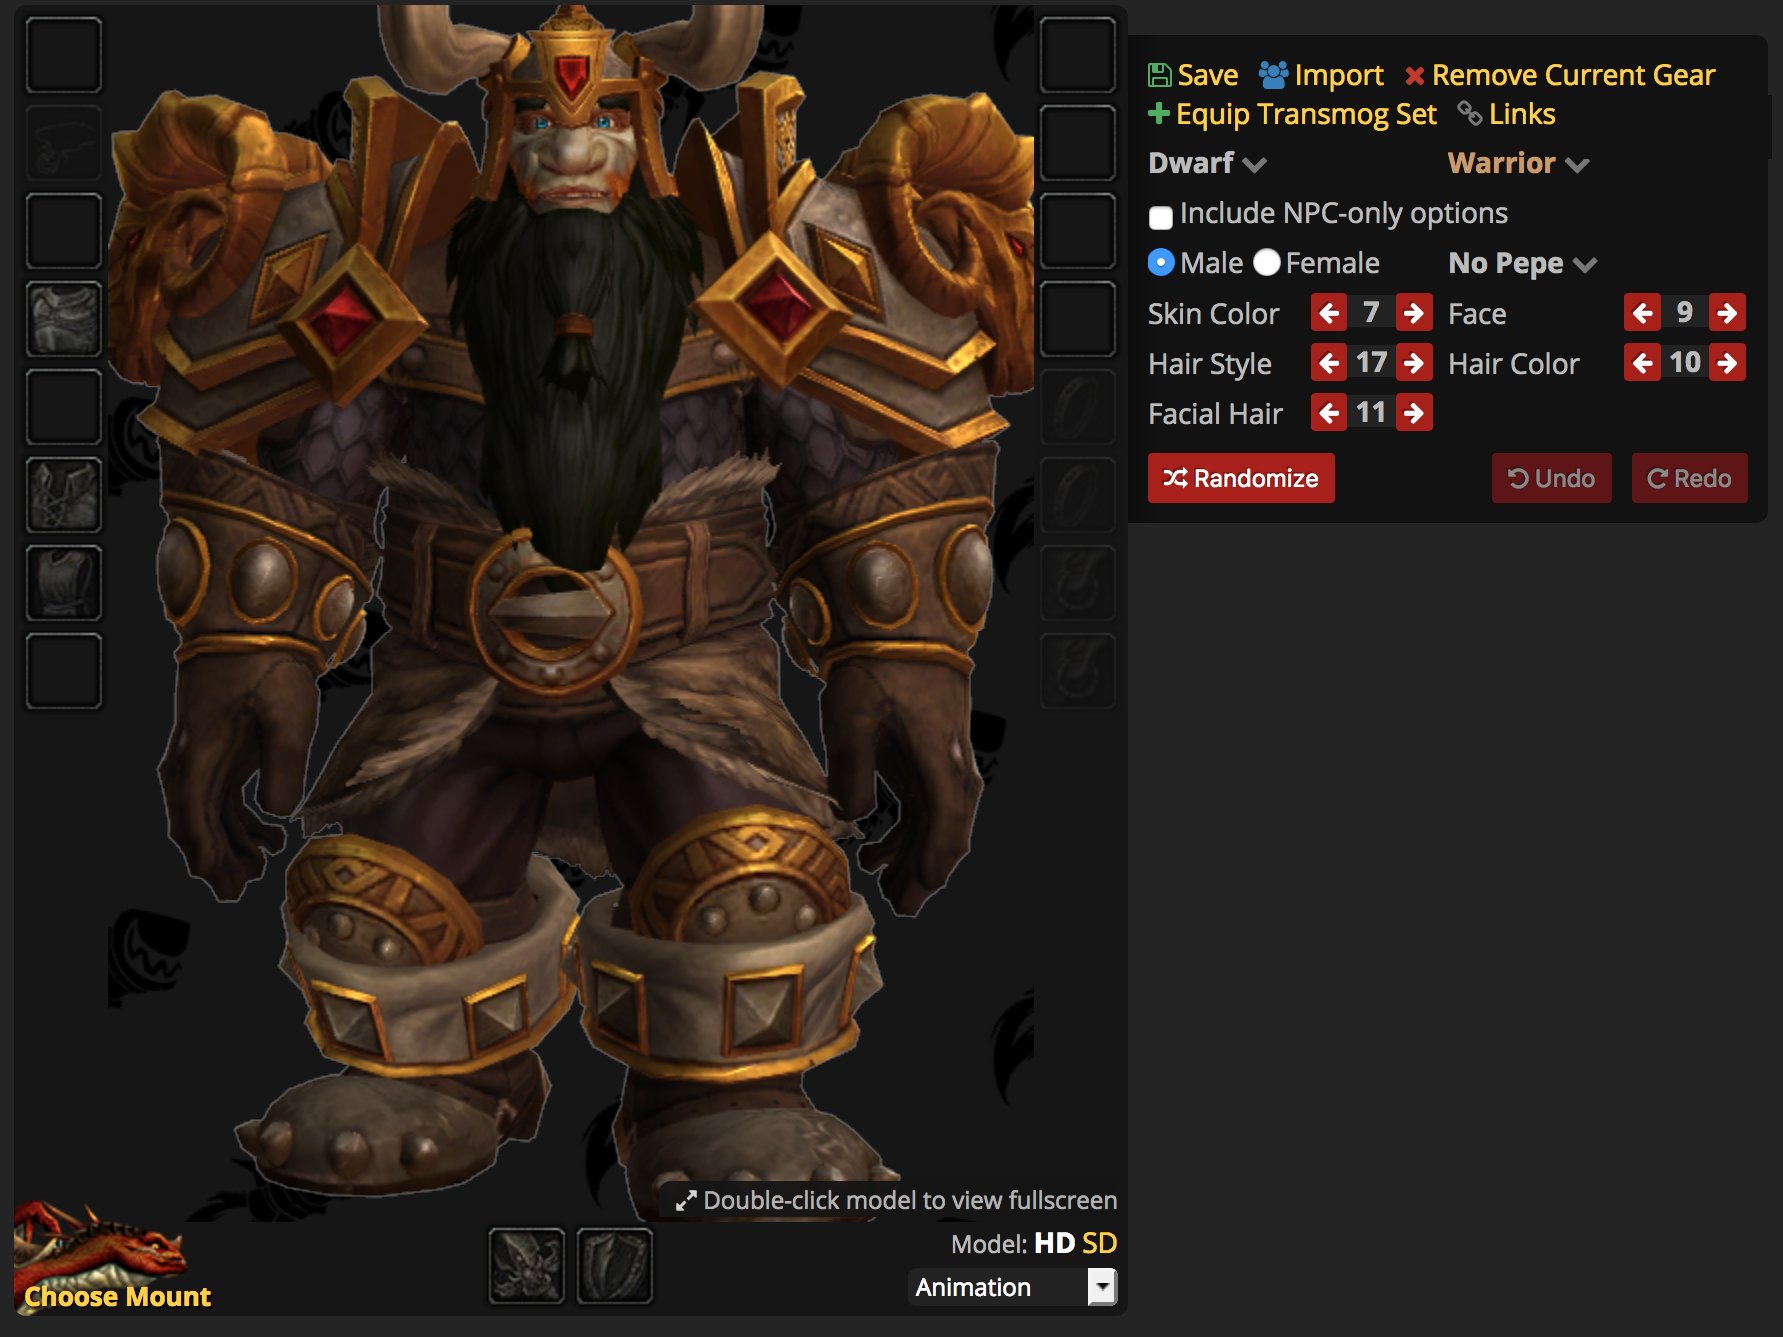 Wowhead💙 on Twitter: "Our database is now updated for the latest 8.1 PTR  Build! Check out the new interesting items, including Dwarf Heritage Armor  which is up in the Dressing Room https://t.co/1fb3DimXaS